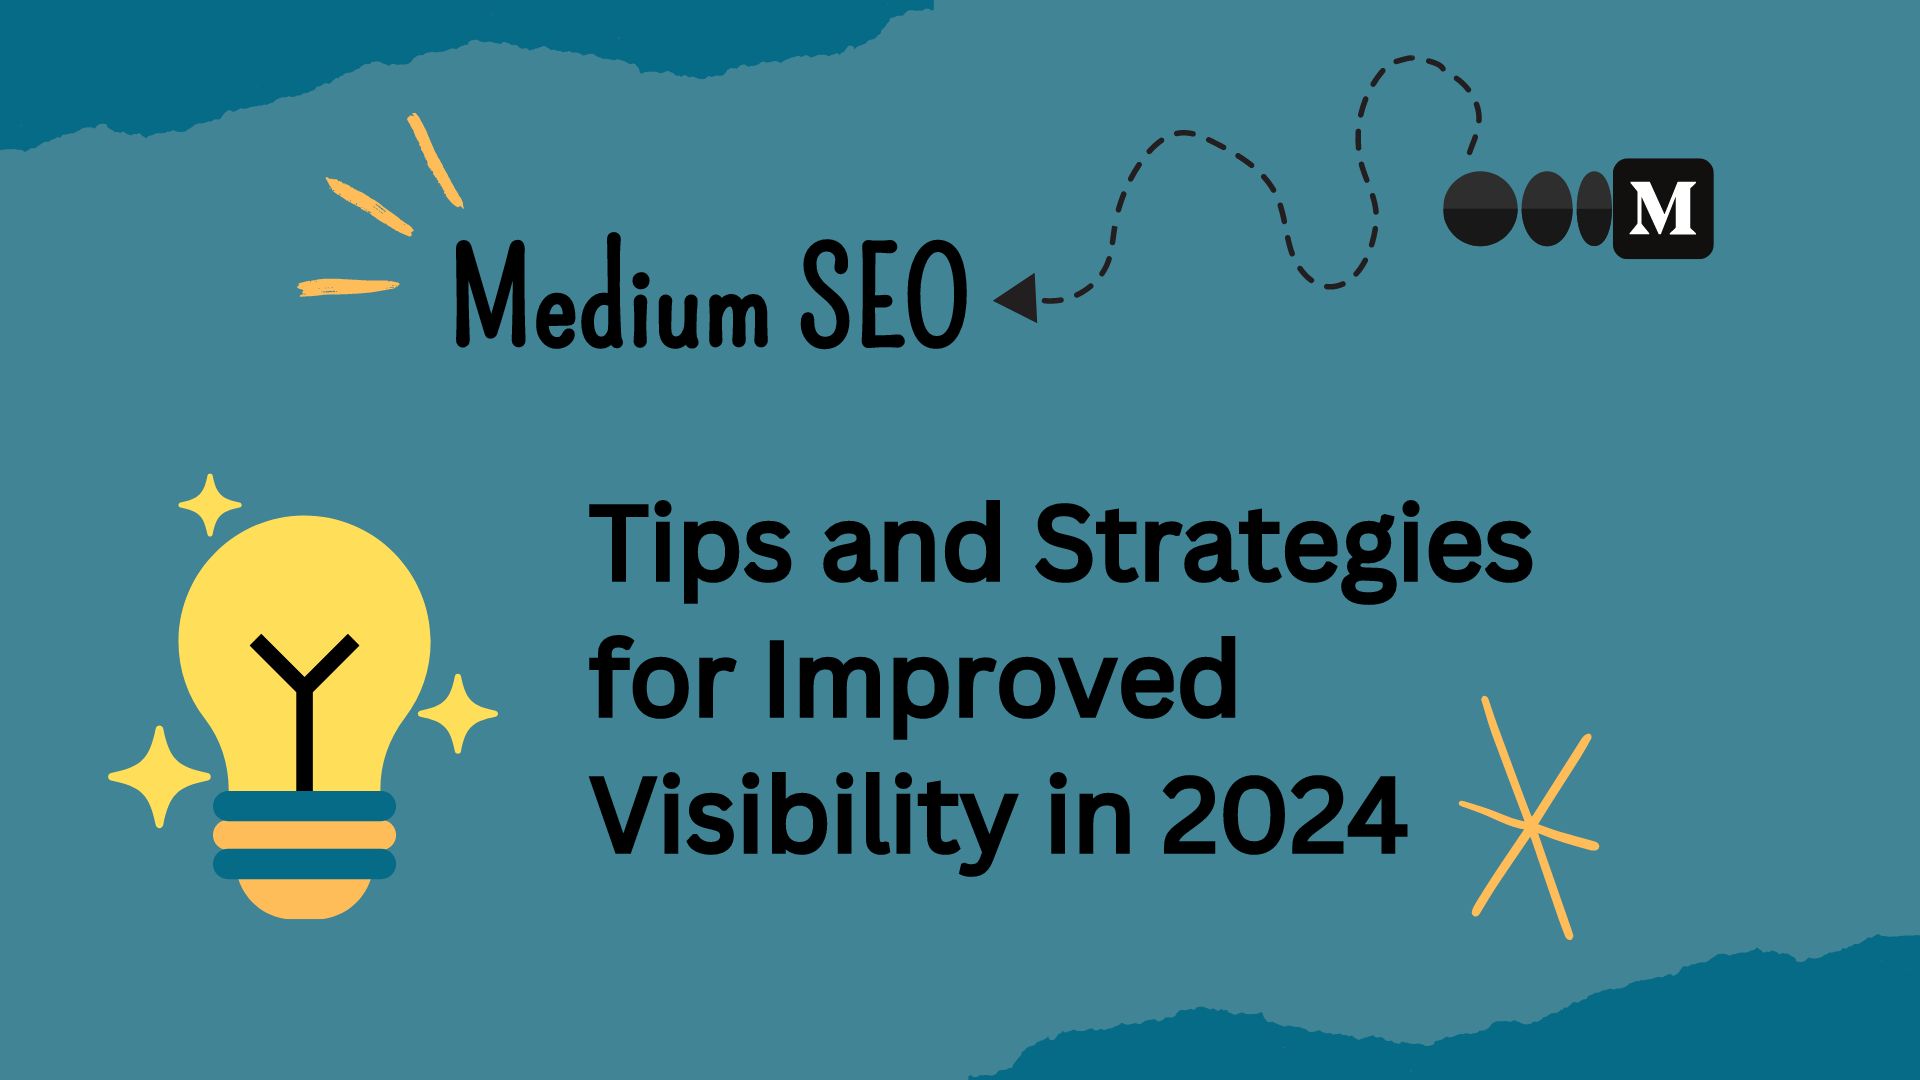 Medium SEO - Tips and Strategies for Improved Visibility in 2024